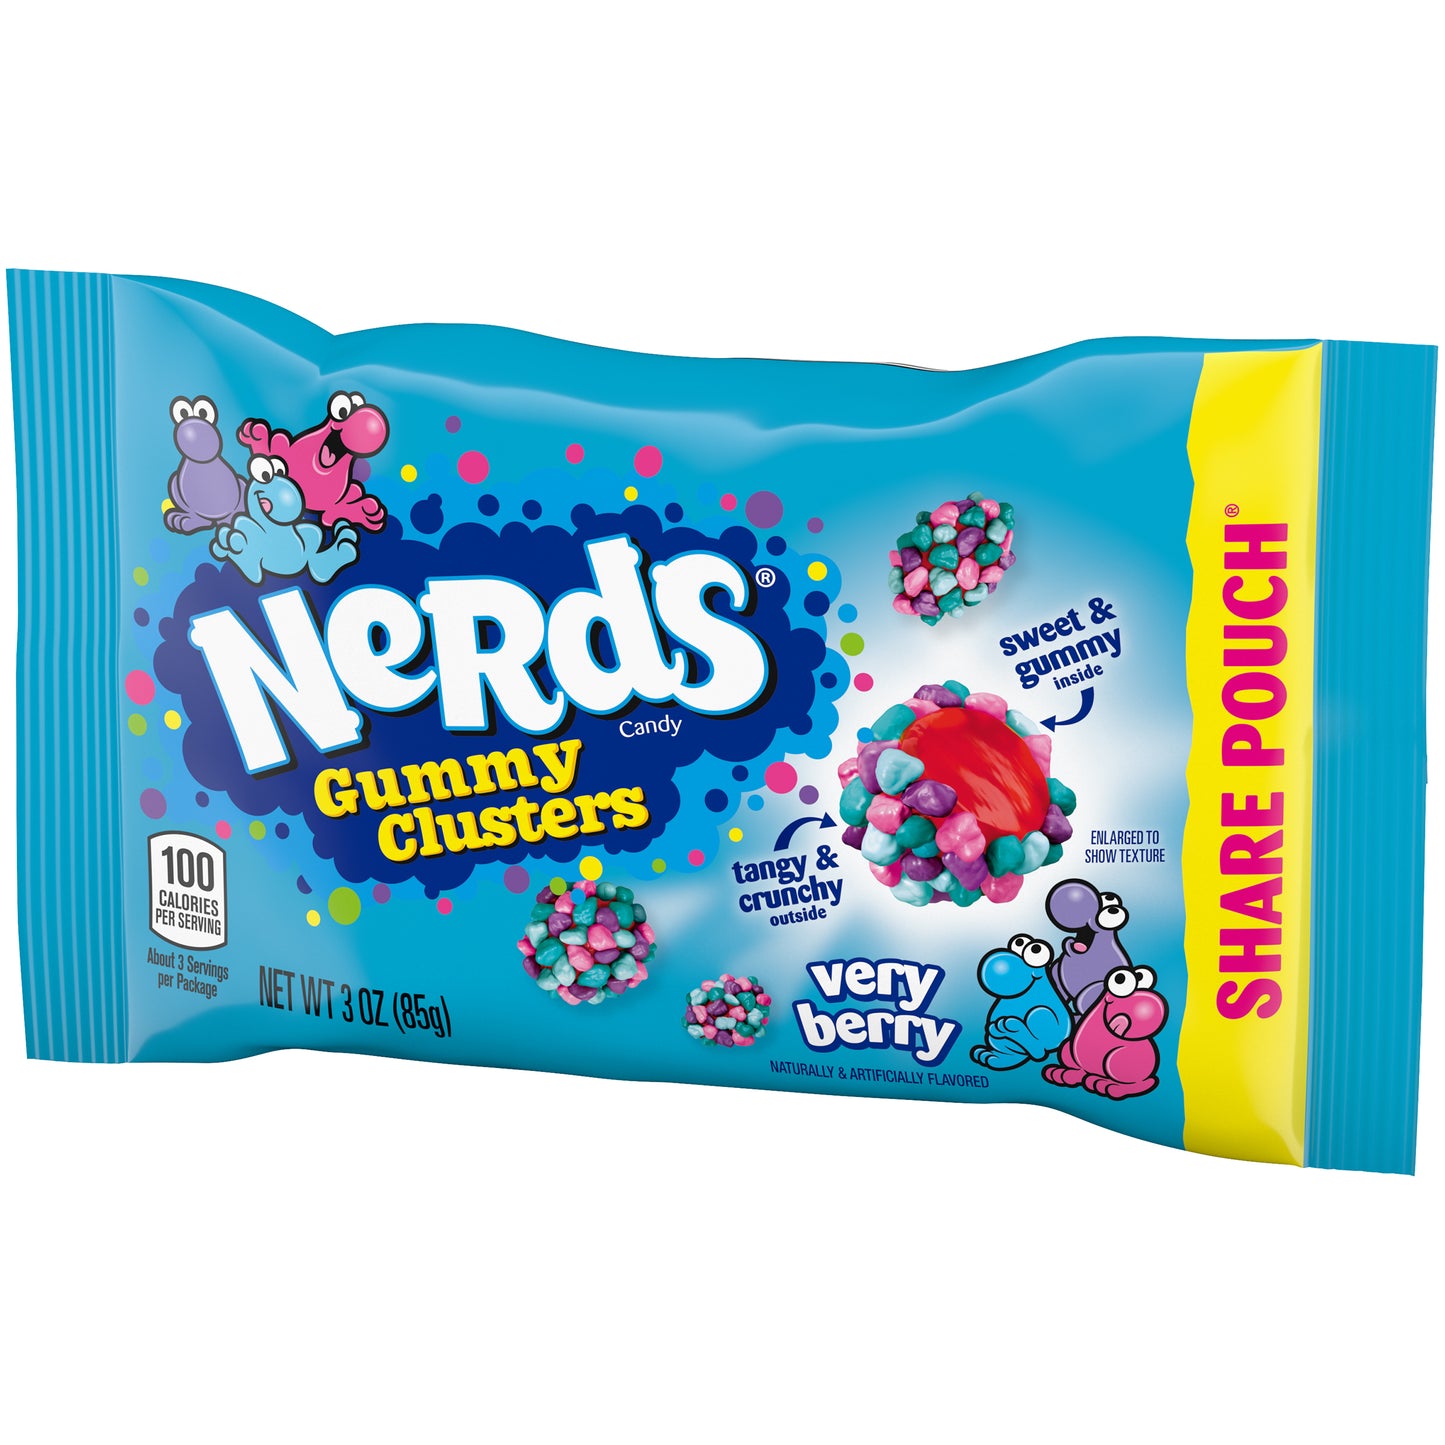 Nerds Gummy Clusters Very Berry Share Pack 3oz 12ct